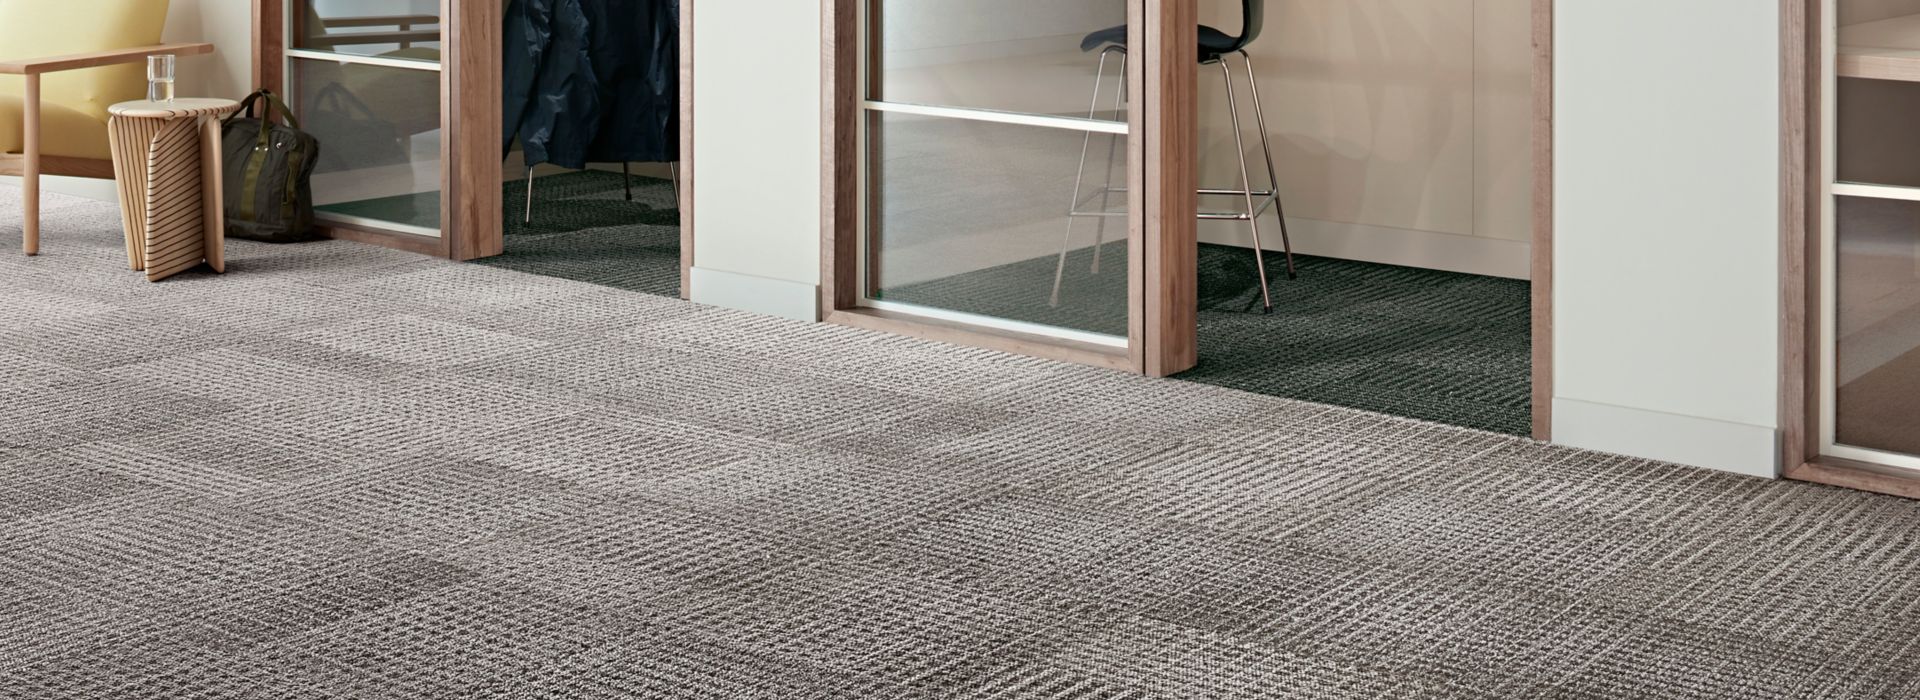 Interface Breakout carpet tile in meeting rooms